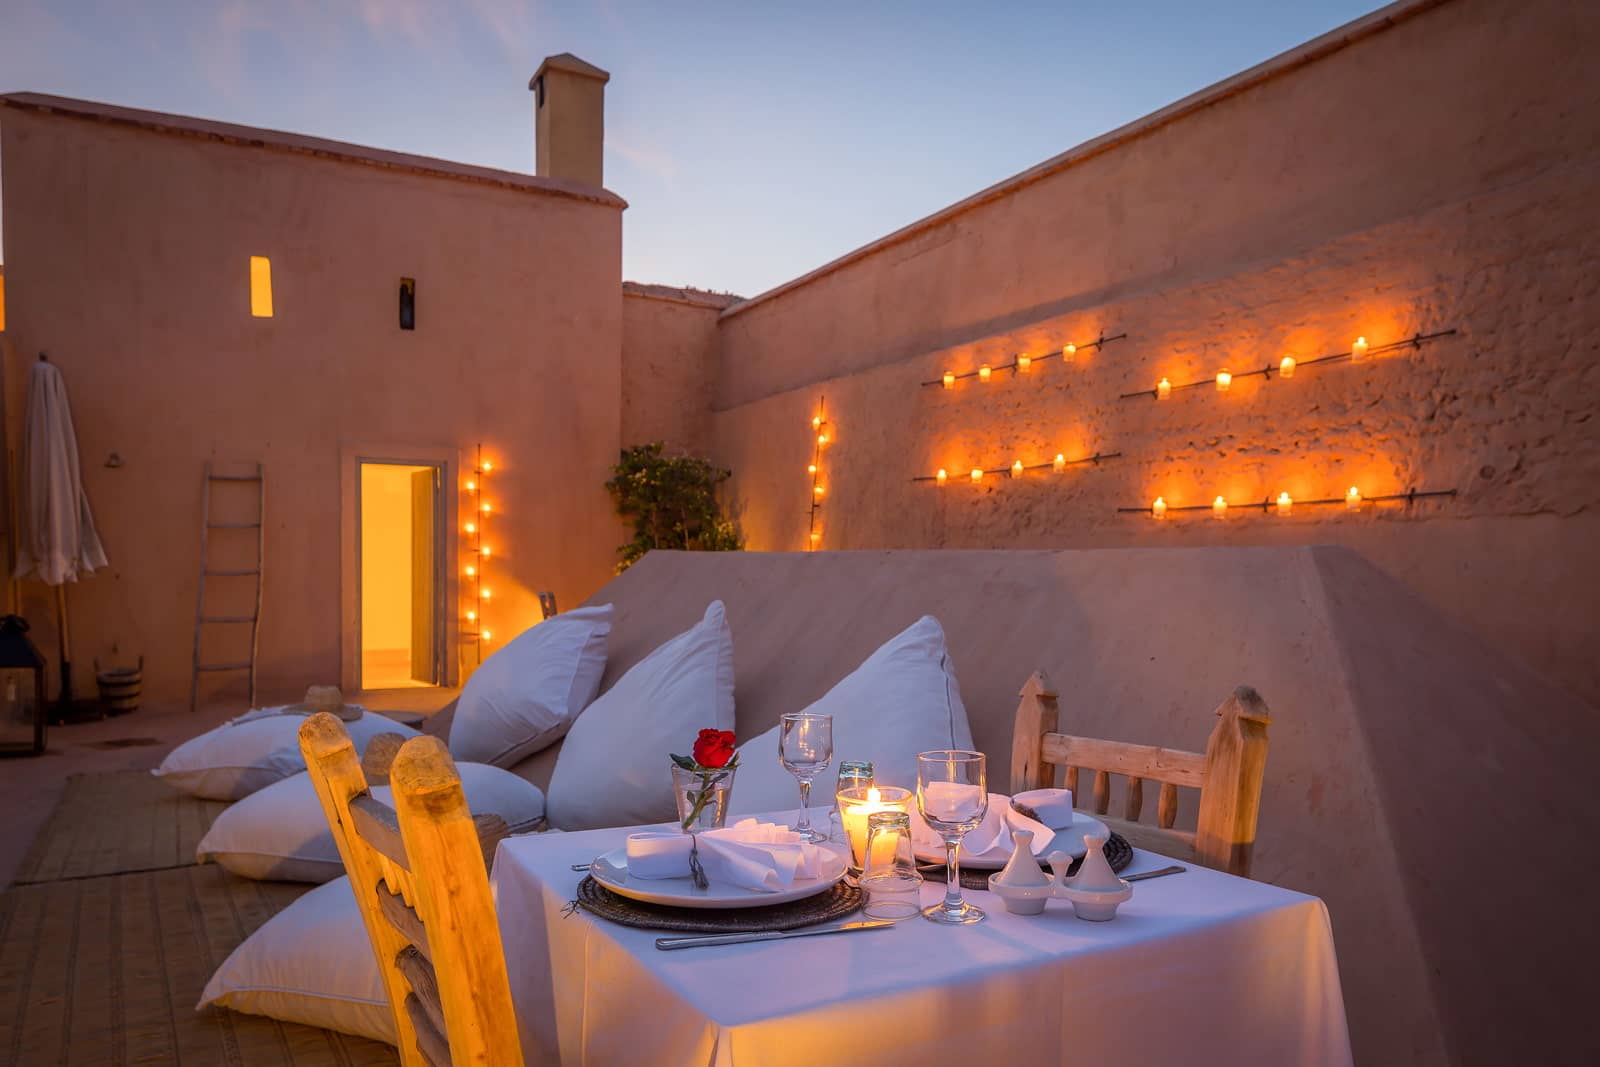 Coxy rooftop space in Marrakech